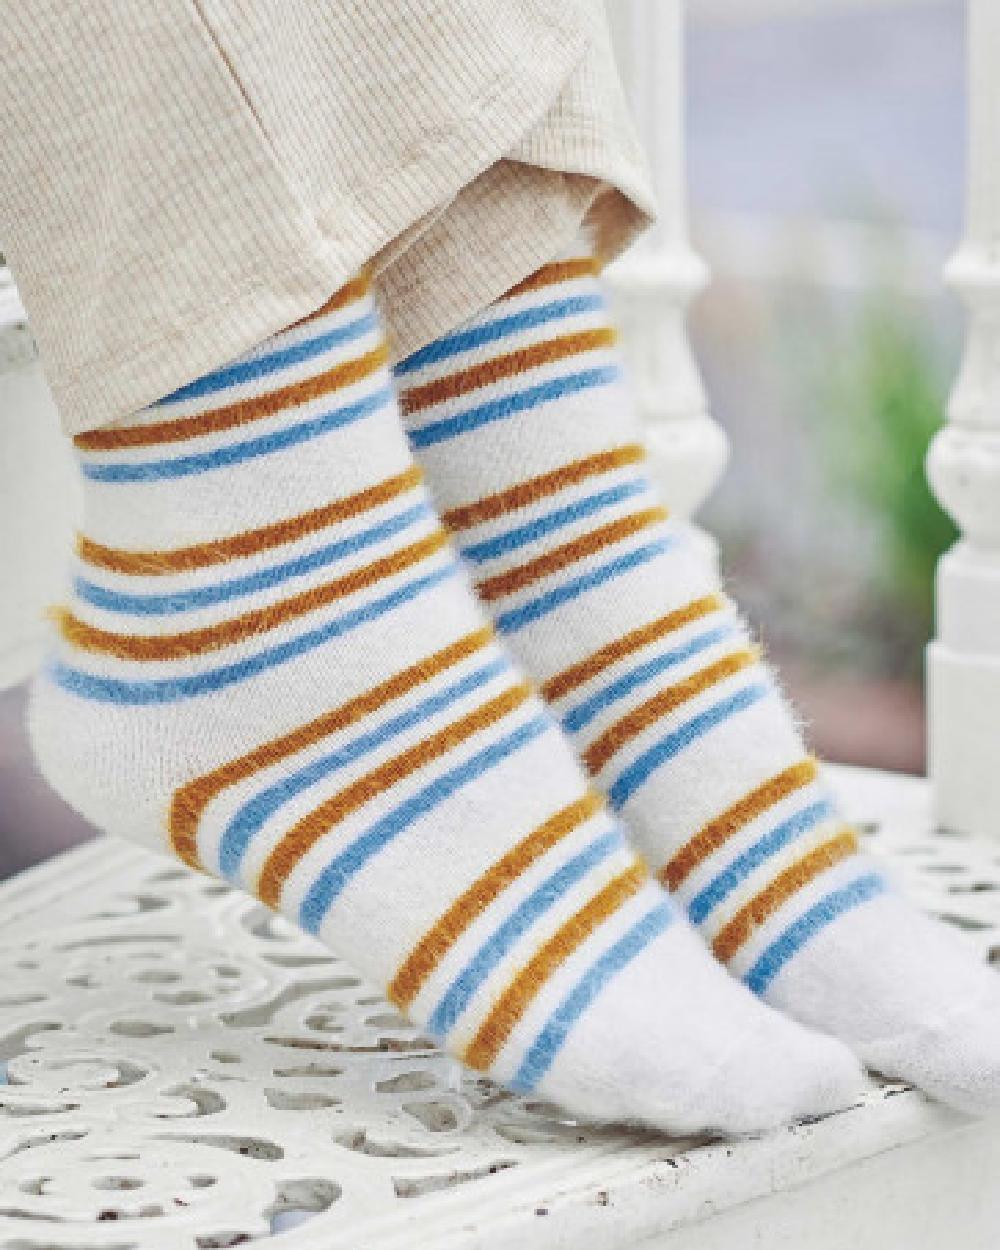 HJ Hall Fluffy Socks | 2 Pack in Cream and Pale Blue 